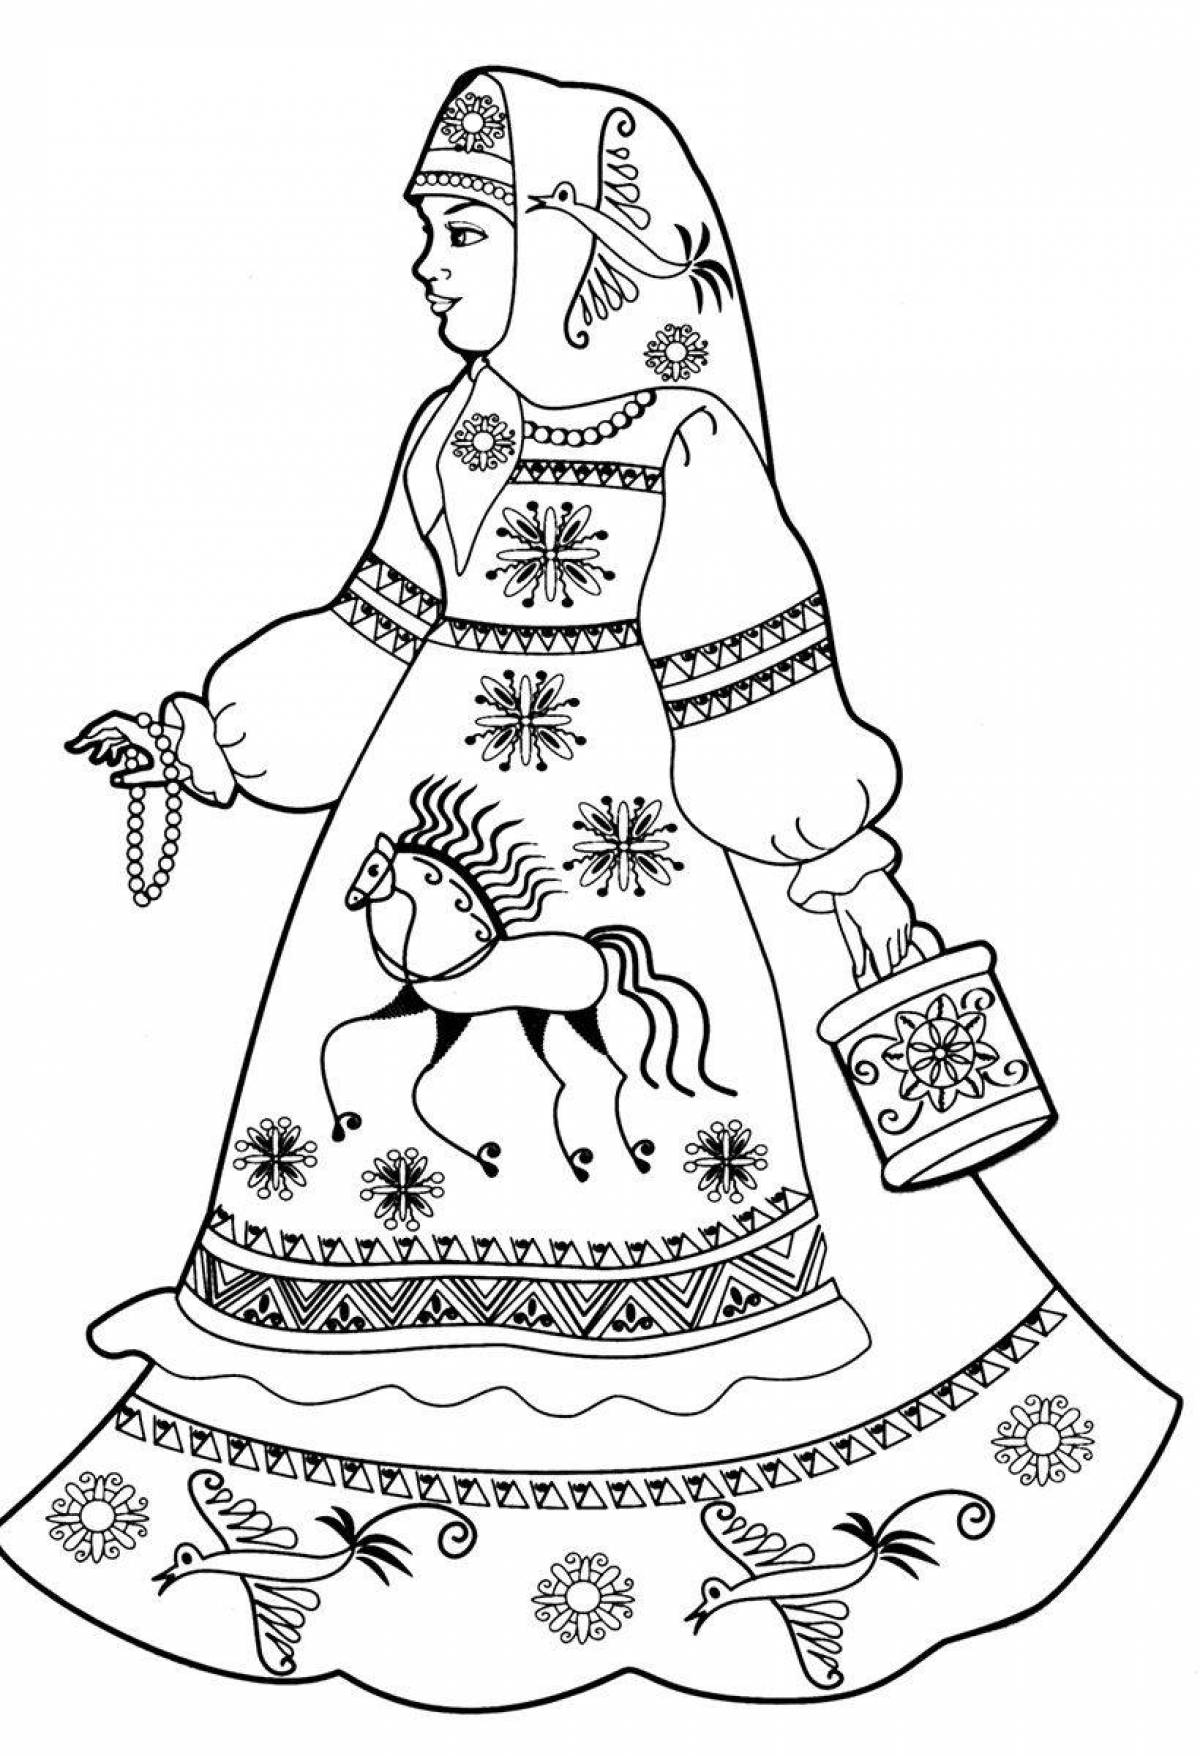 Coloring page charming Russian national costume